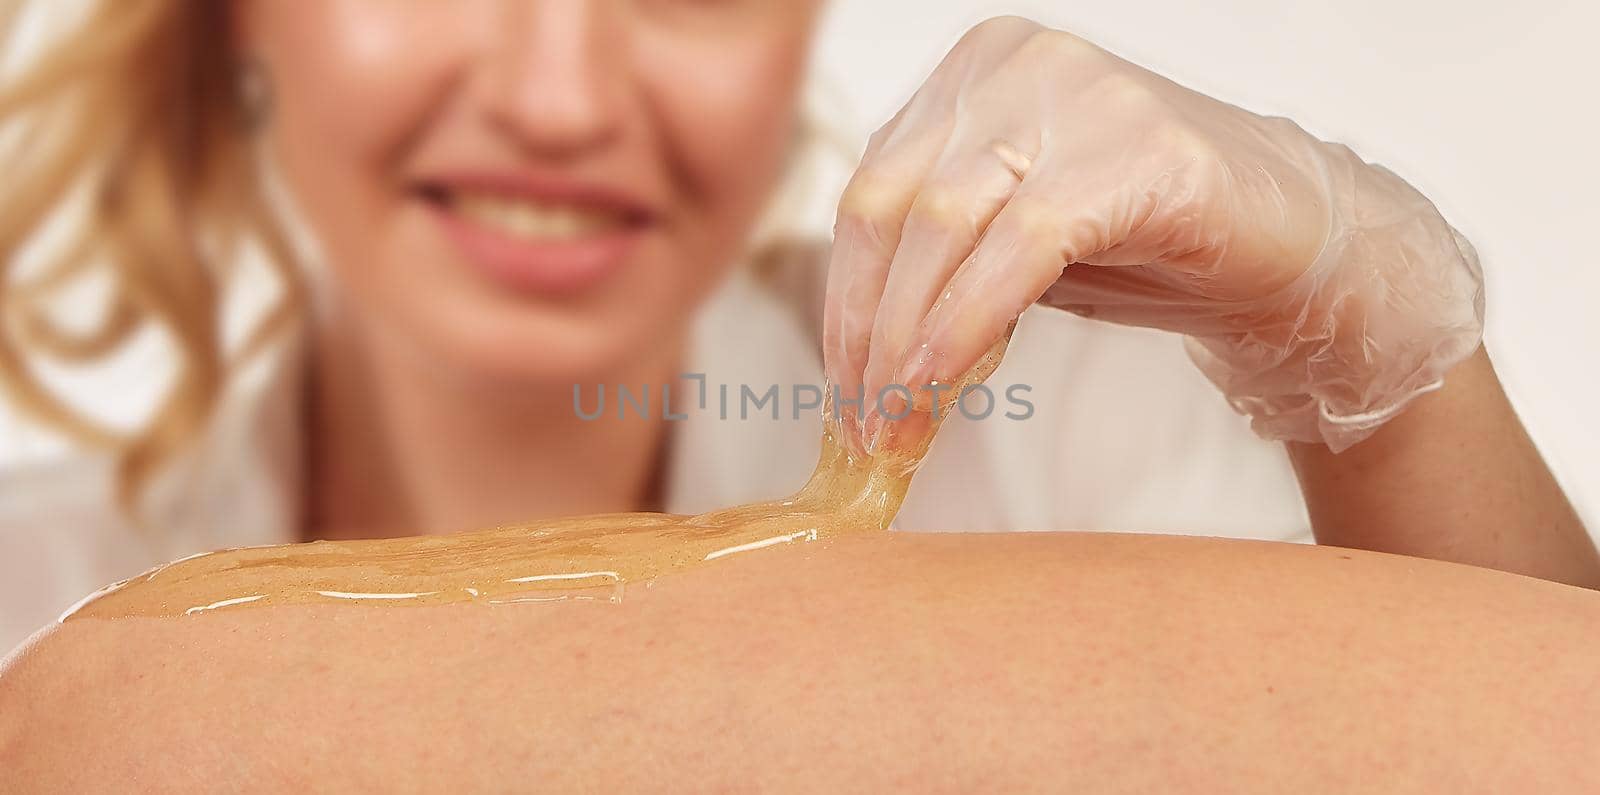 Sugar paste for light depilation. Depilation with sugar paste in the salon on a white background.